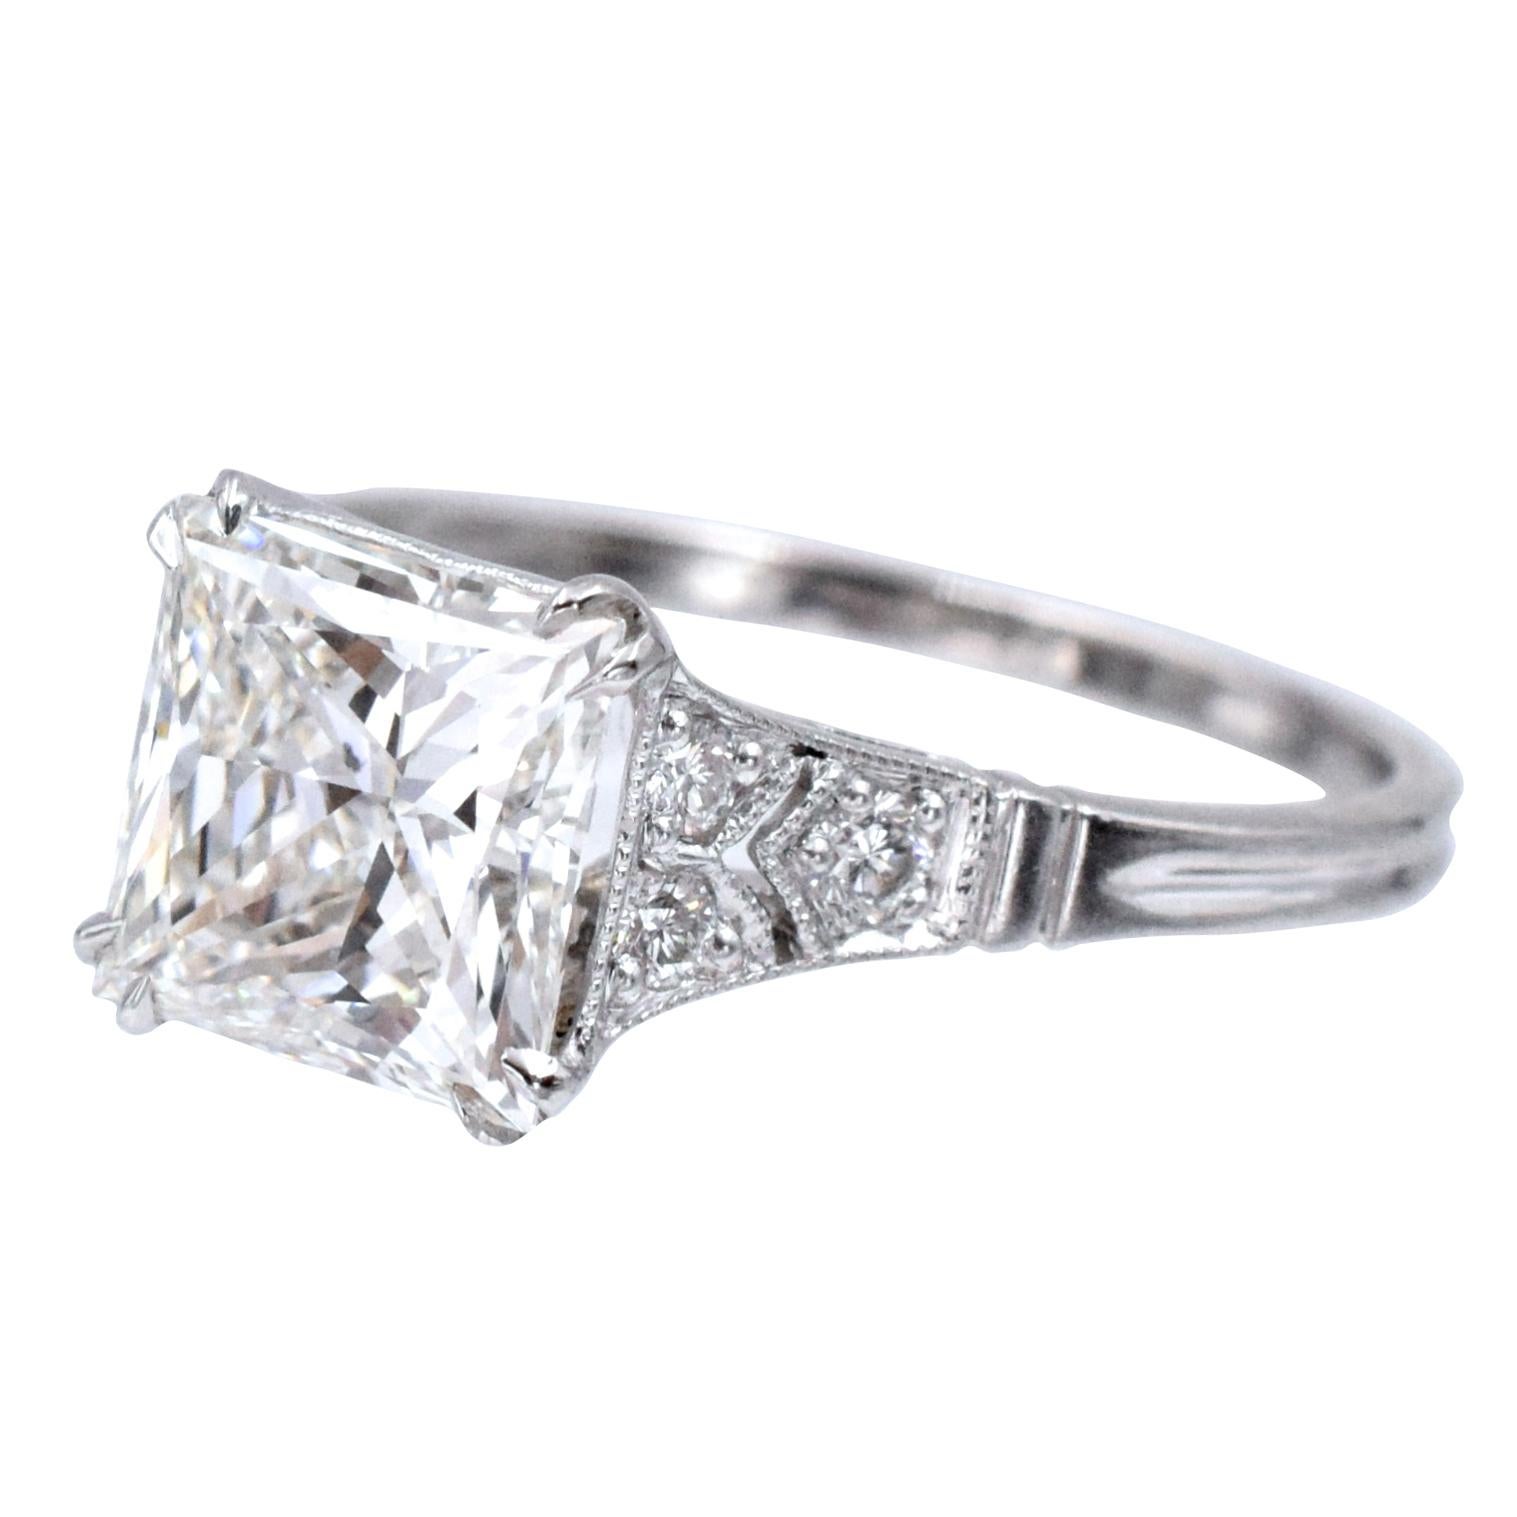 Engagement ring. Made in platinum Art- Deco inspired mounting set with 6 round cut diamonds, total weight 0.12 carat ,color: G-H, clarity: VS. In the center: 2.33 carat  princess cut diamond, 
color: I, clarity: : VS1, GIA# 16420936. Ring size: 6.5. 